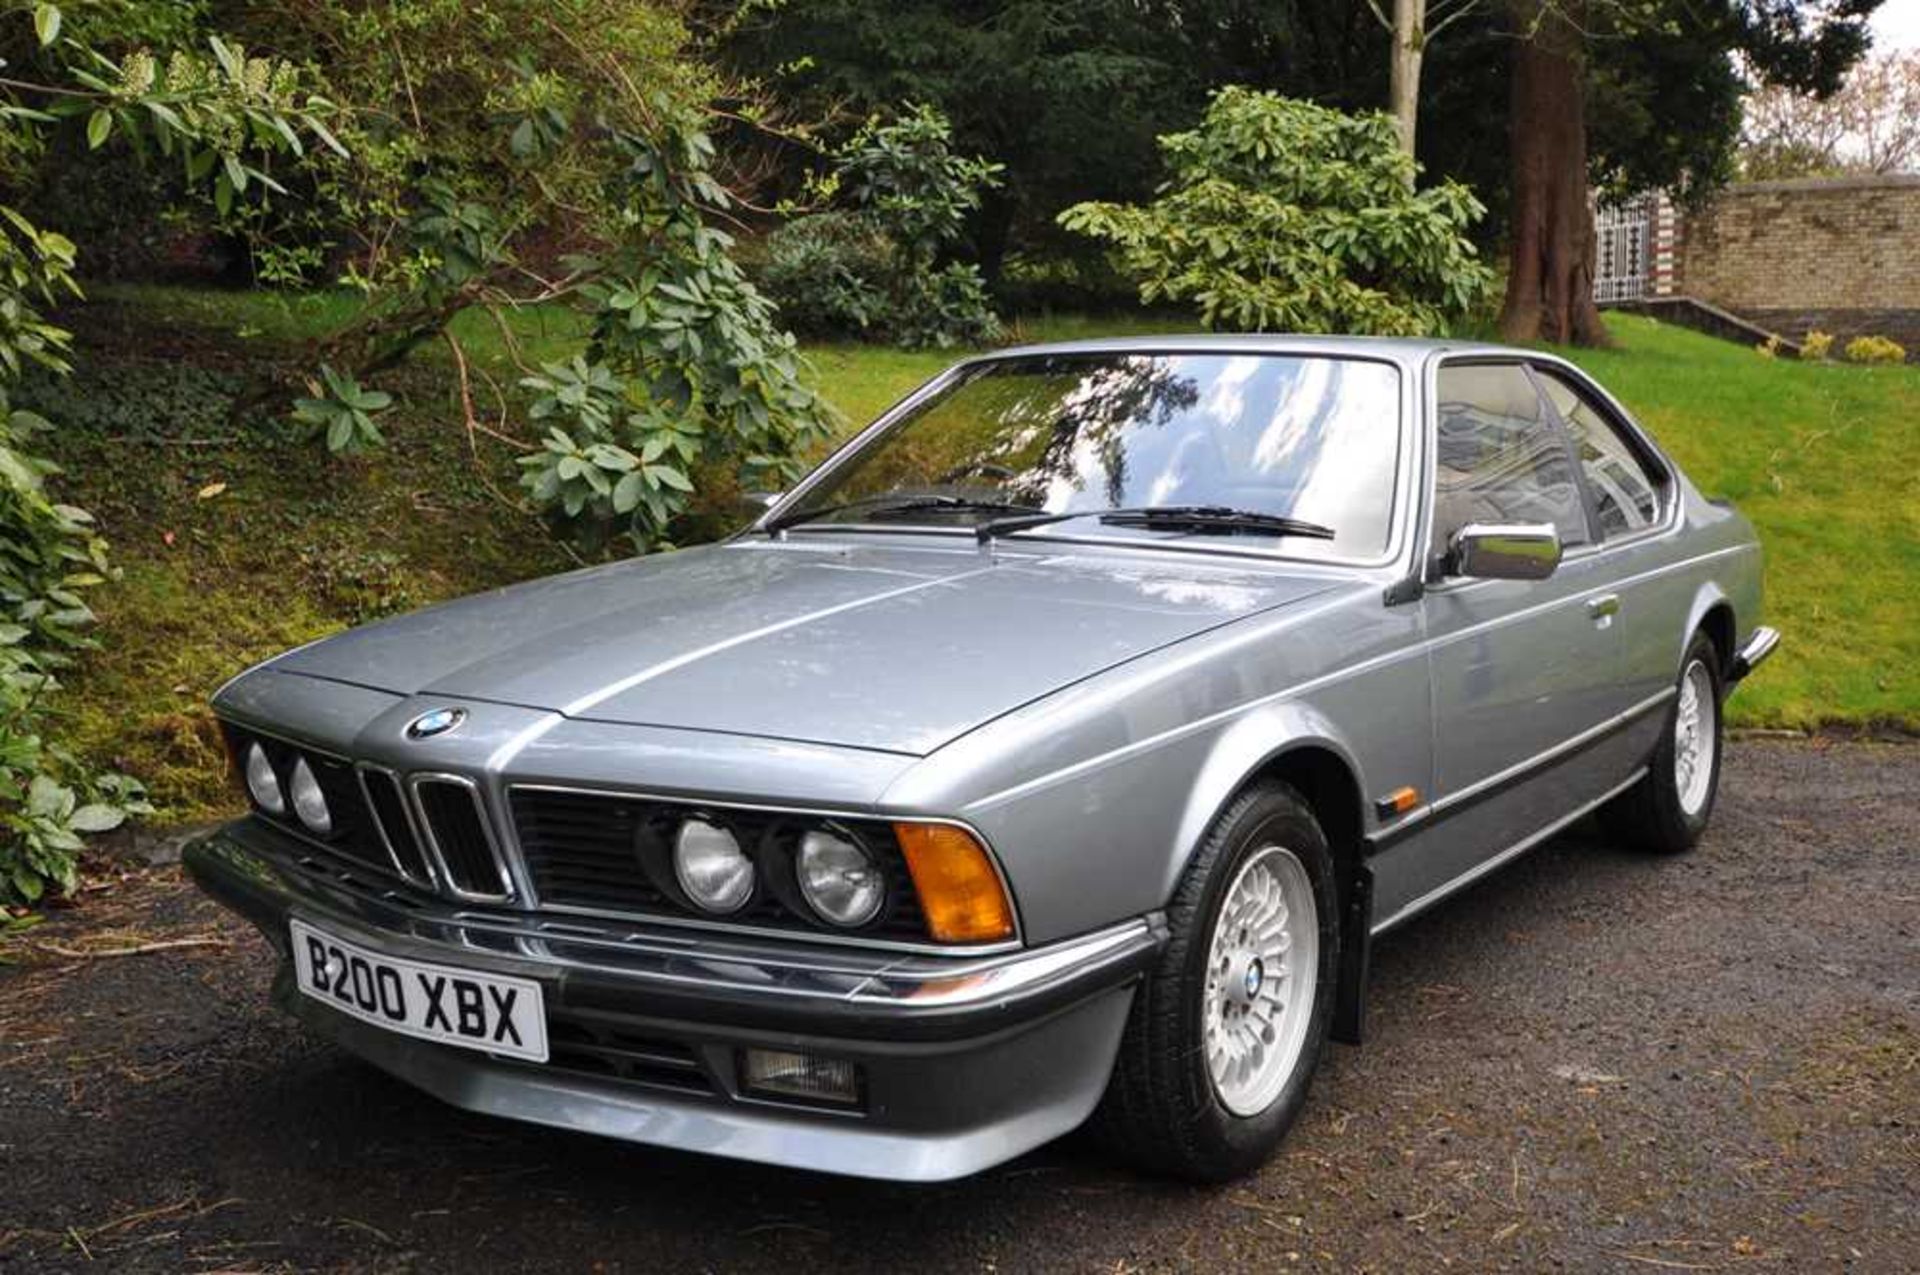 1985 BMW 635CSi Only 54,000 miles and One Owner From New - Image 7 of 43